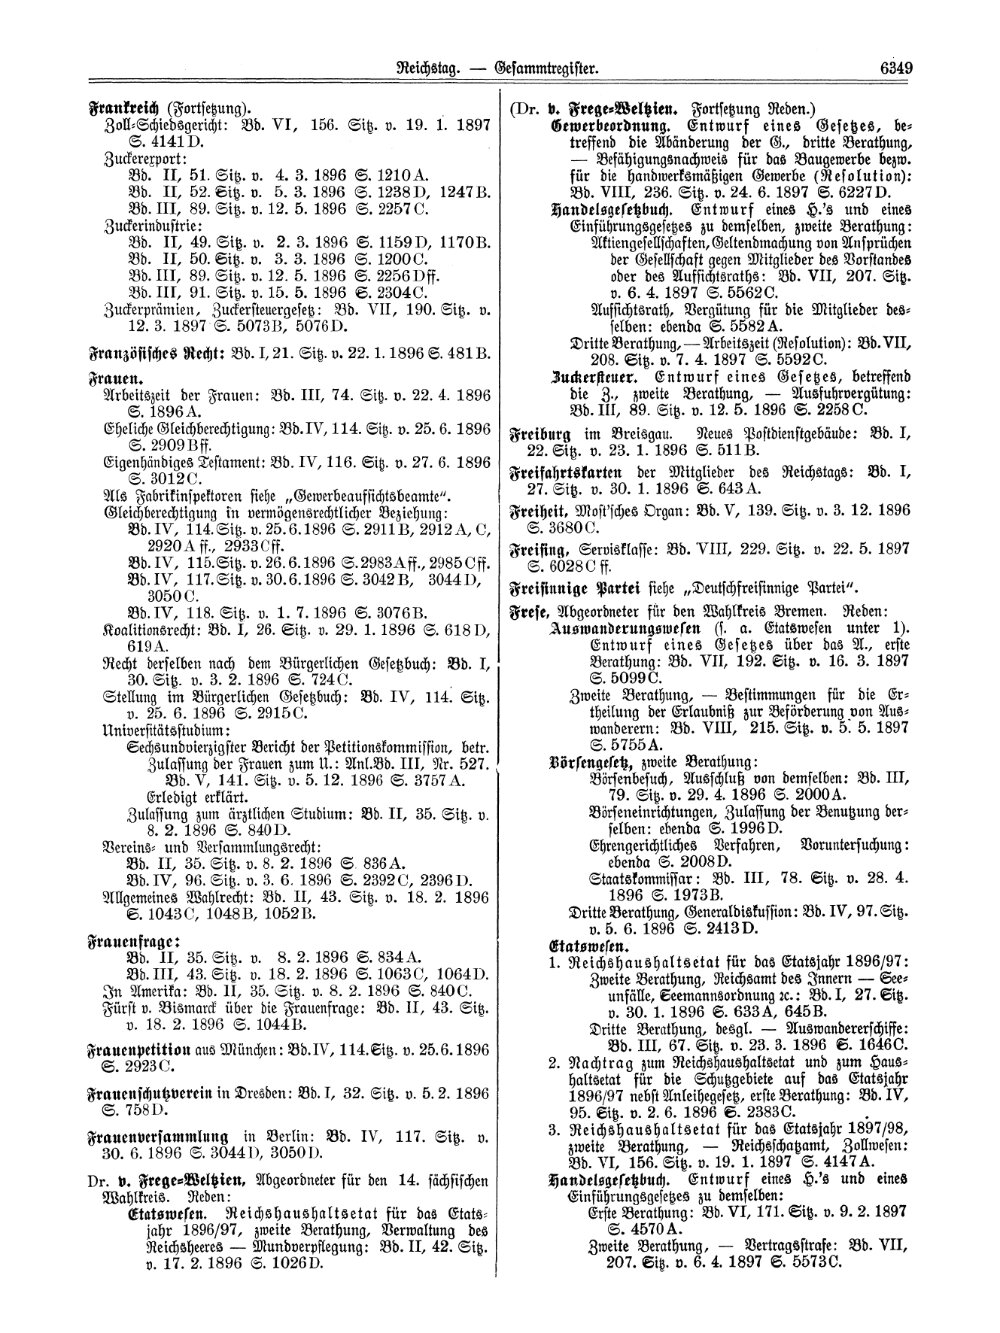 Scan of page 6349